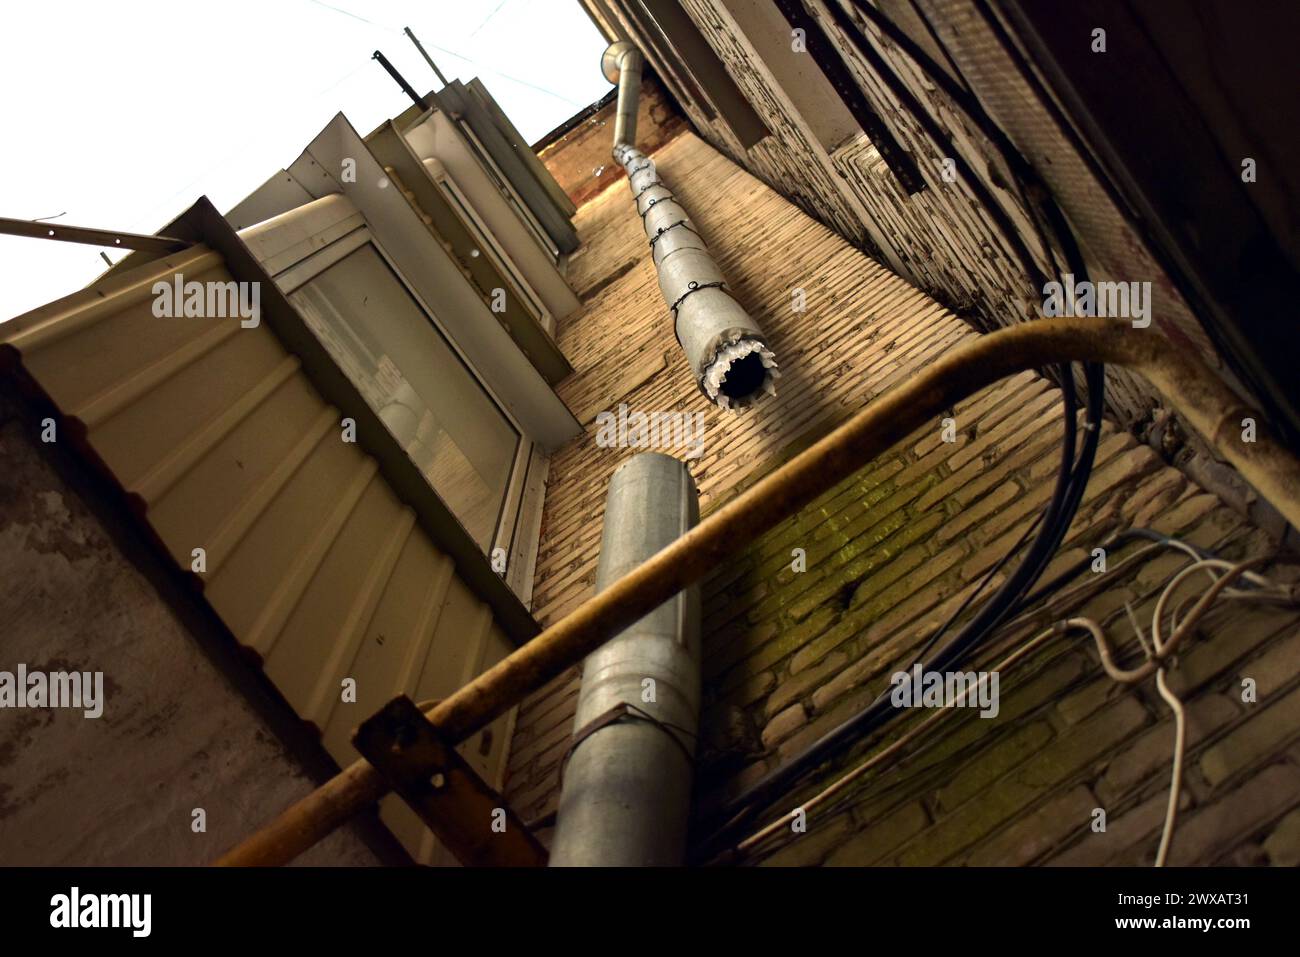 The picture shows the height of the building and the falling drops from the roof of the house. Stock Photo